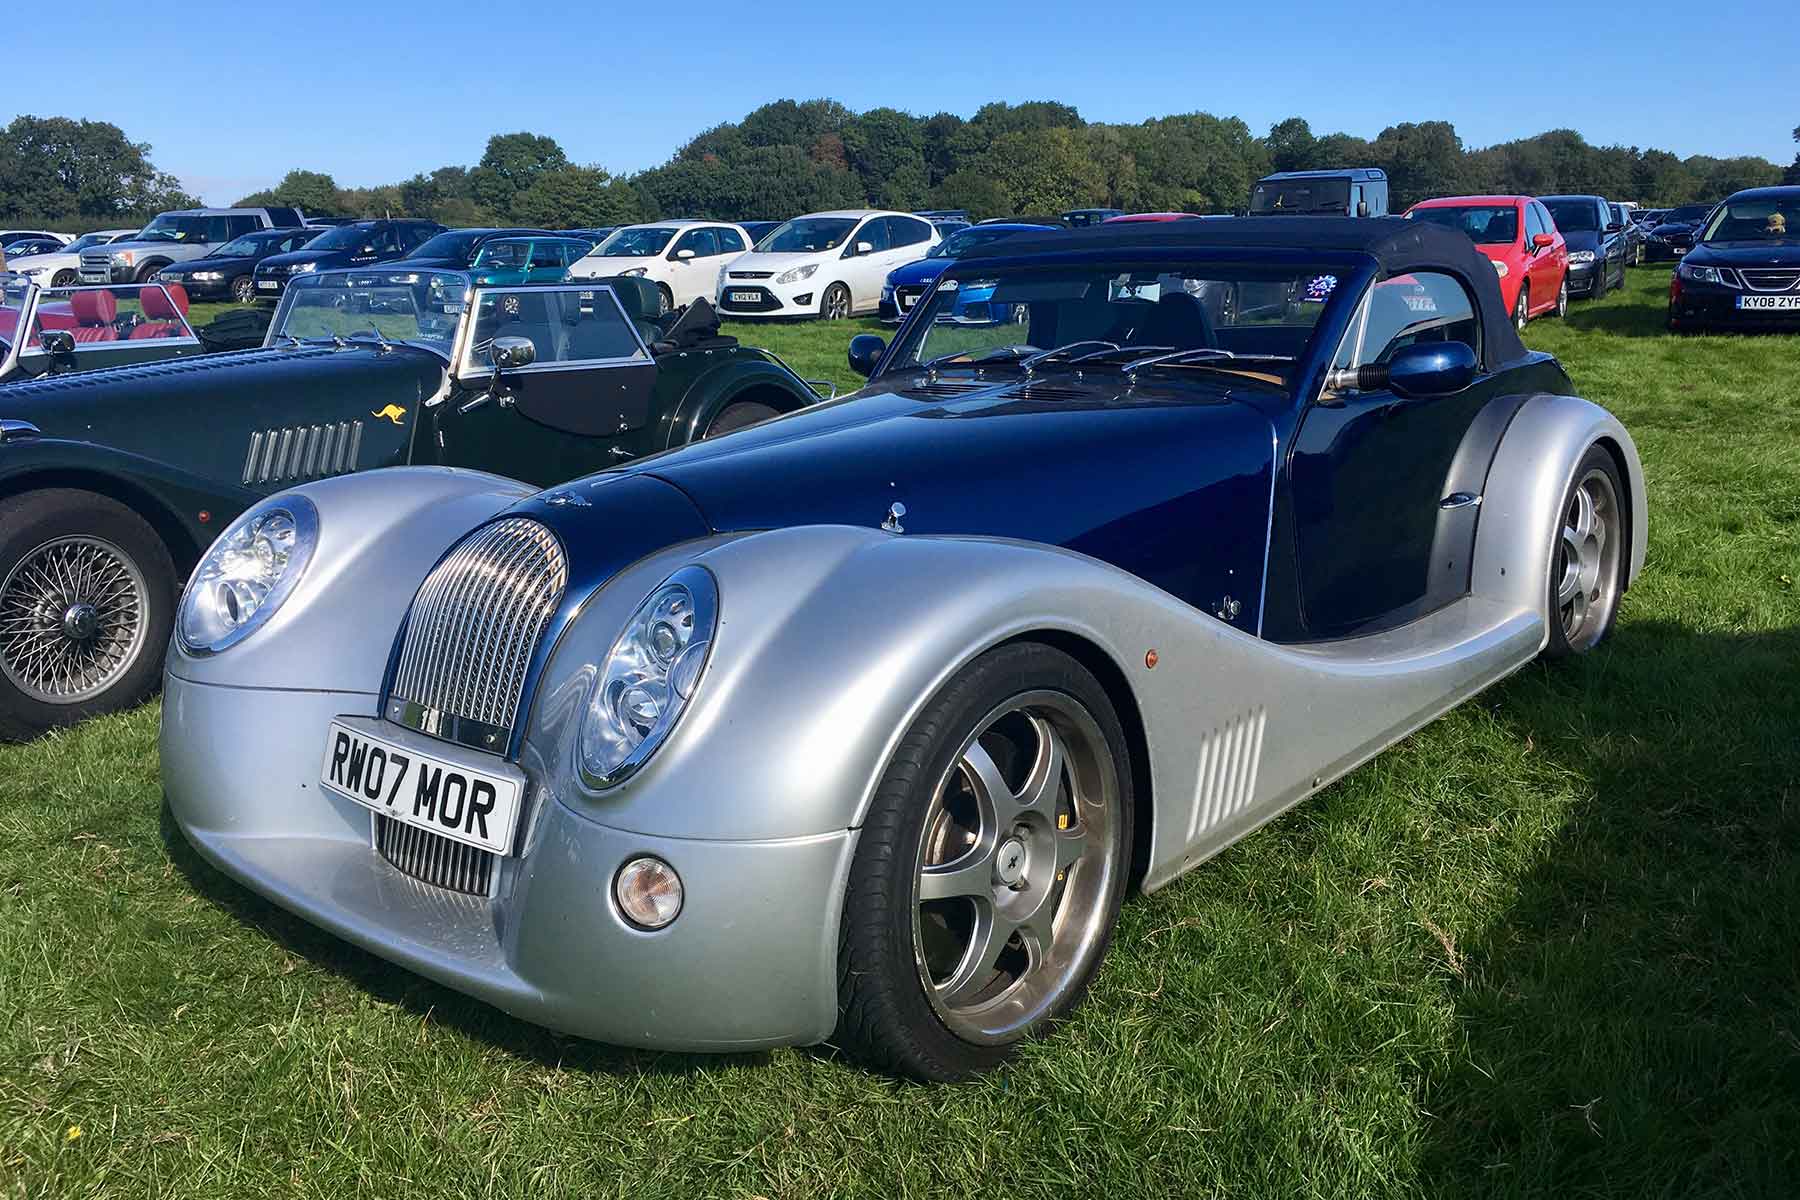 Amazing cars of the Goodwood Revival car park